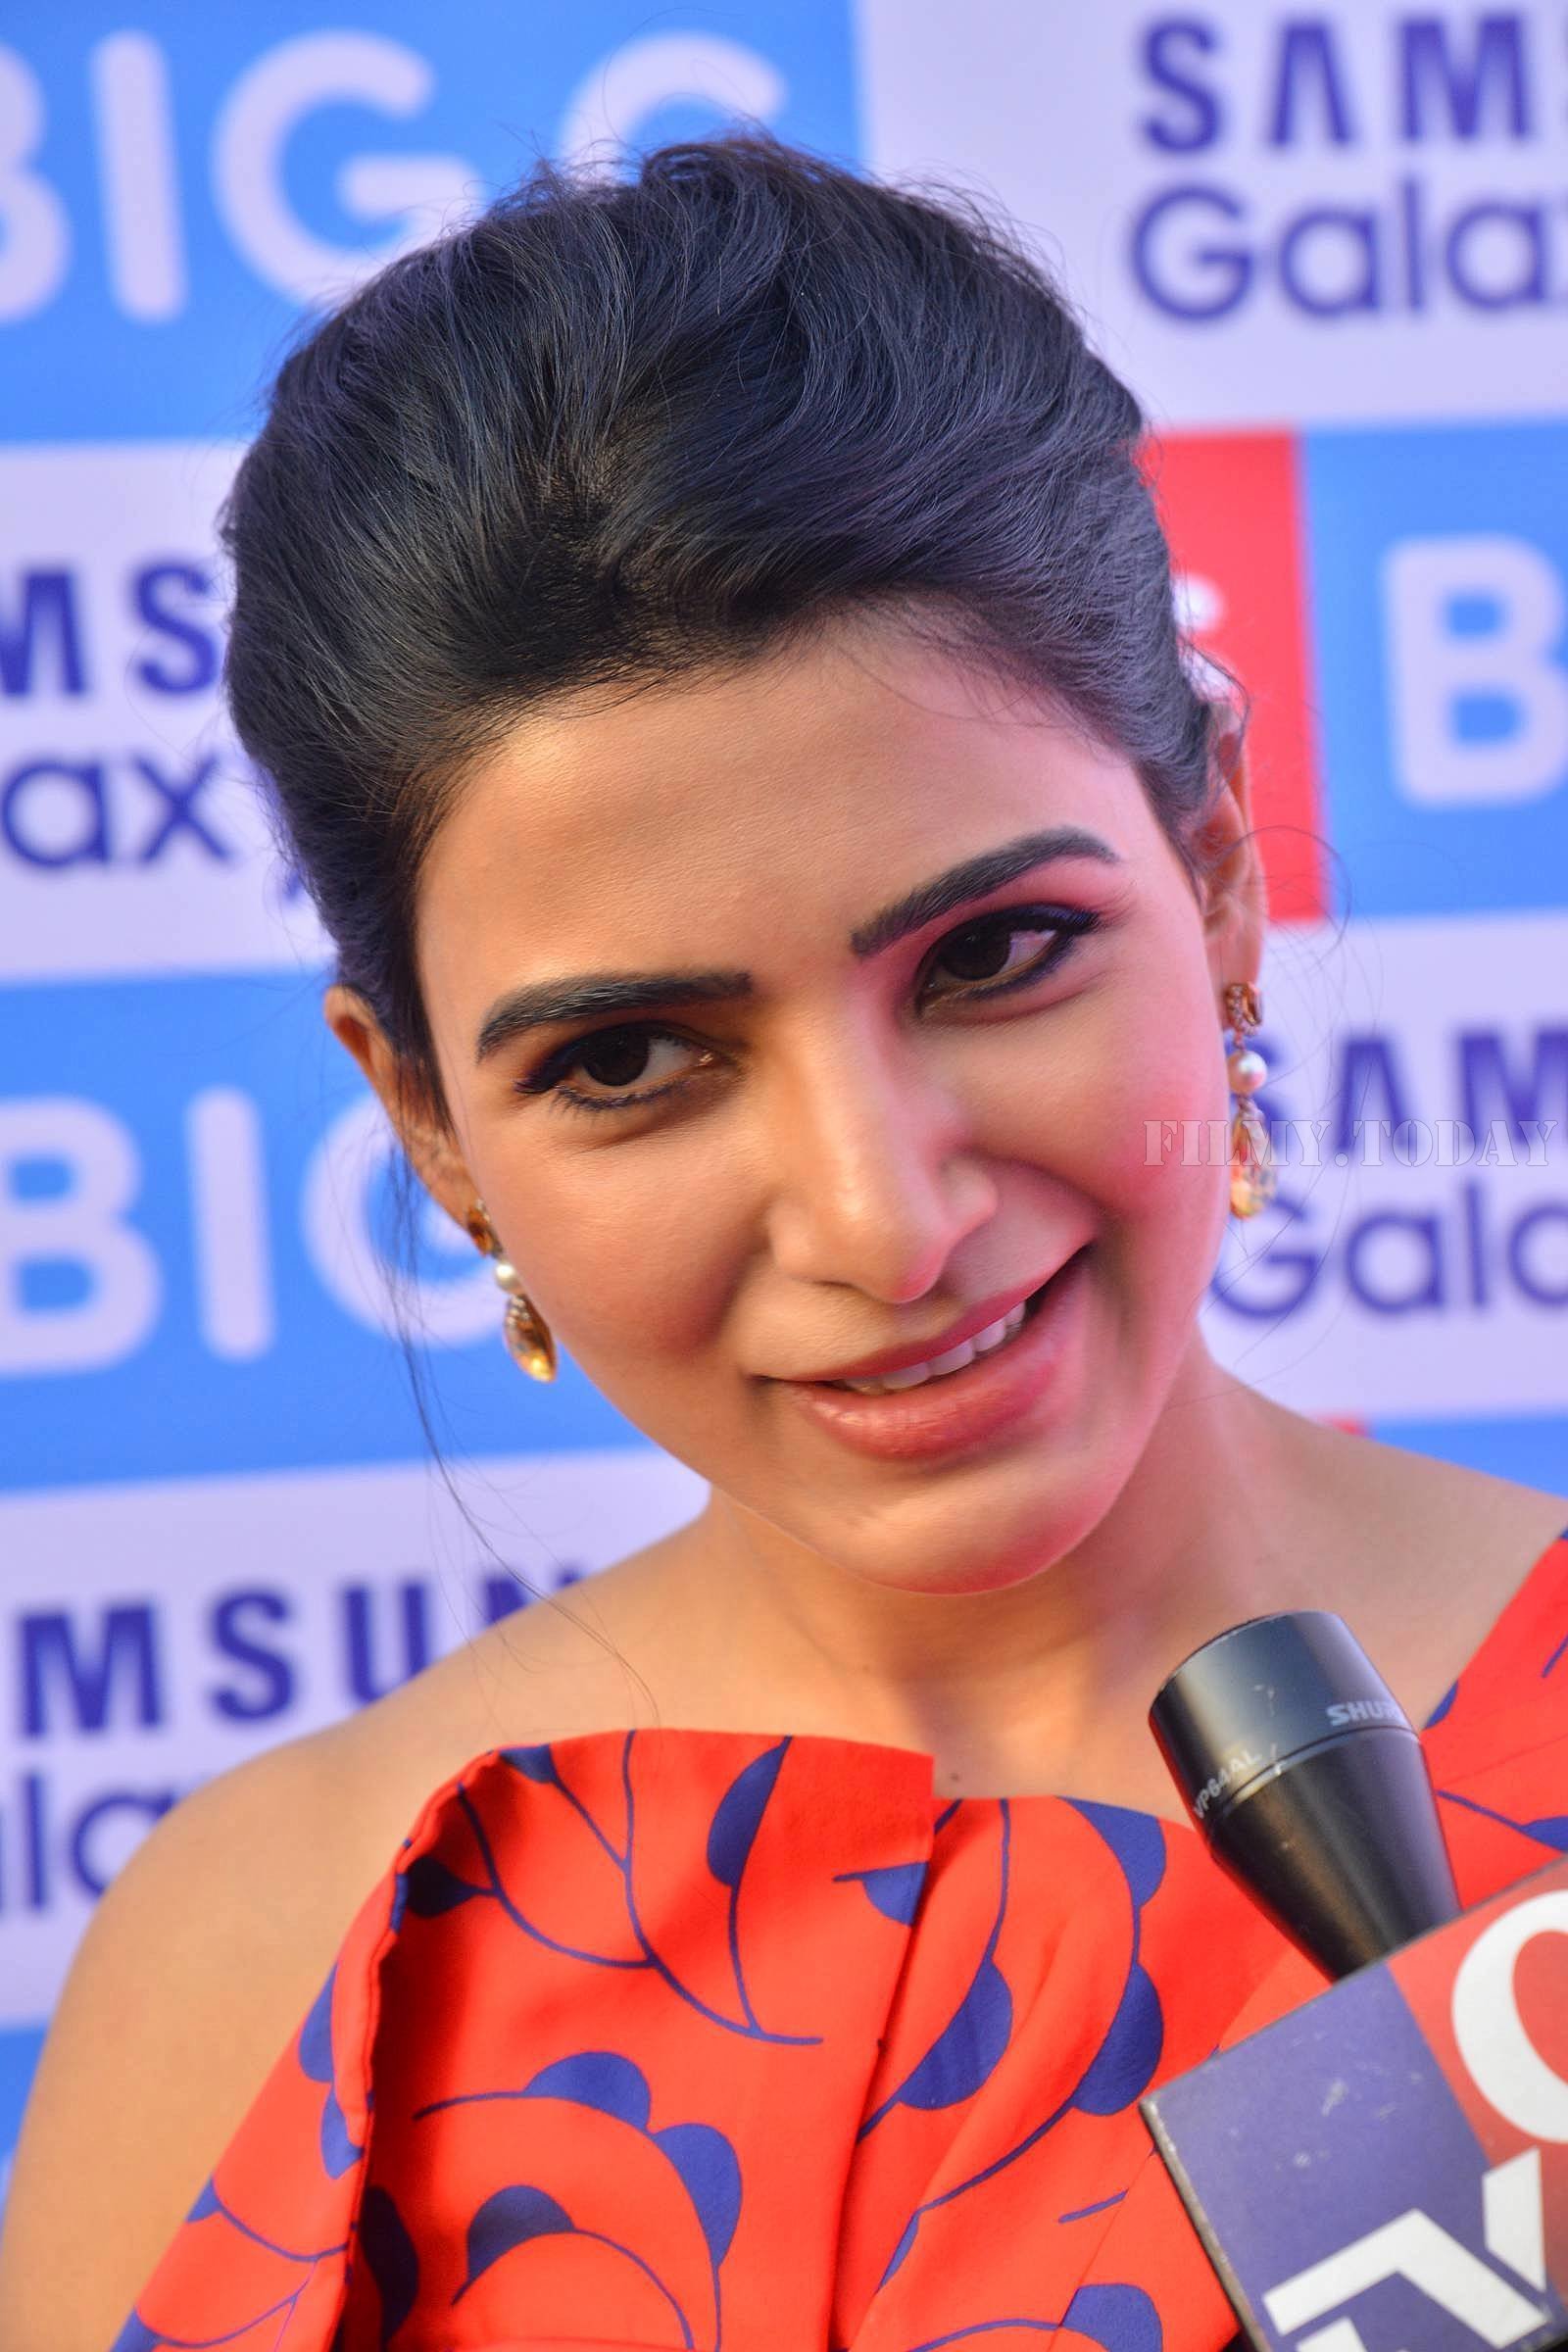 Samantha Ruth Prabhu - Samsung S10e Mobile Launch At Big C Showroom Photos | Picture 1632527